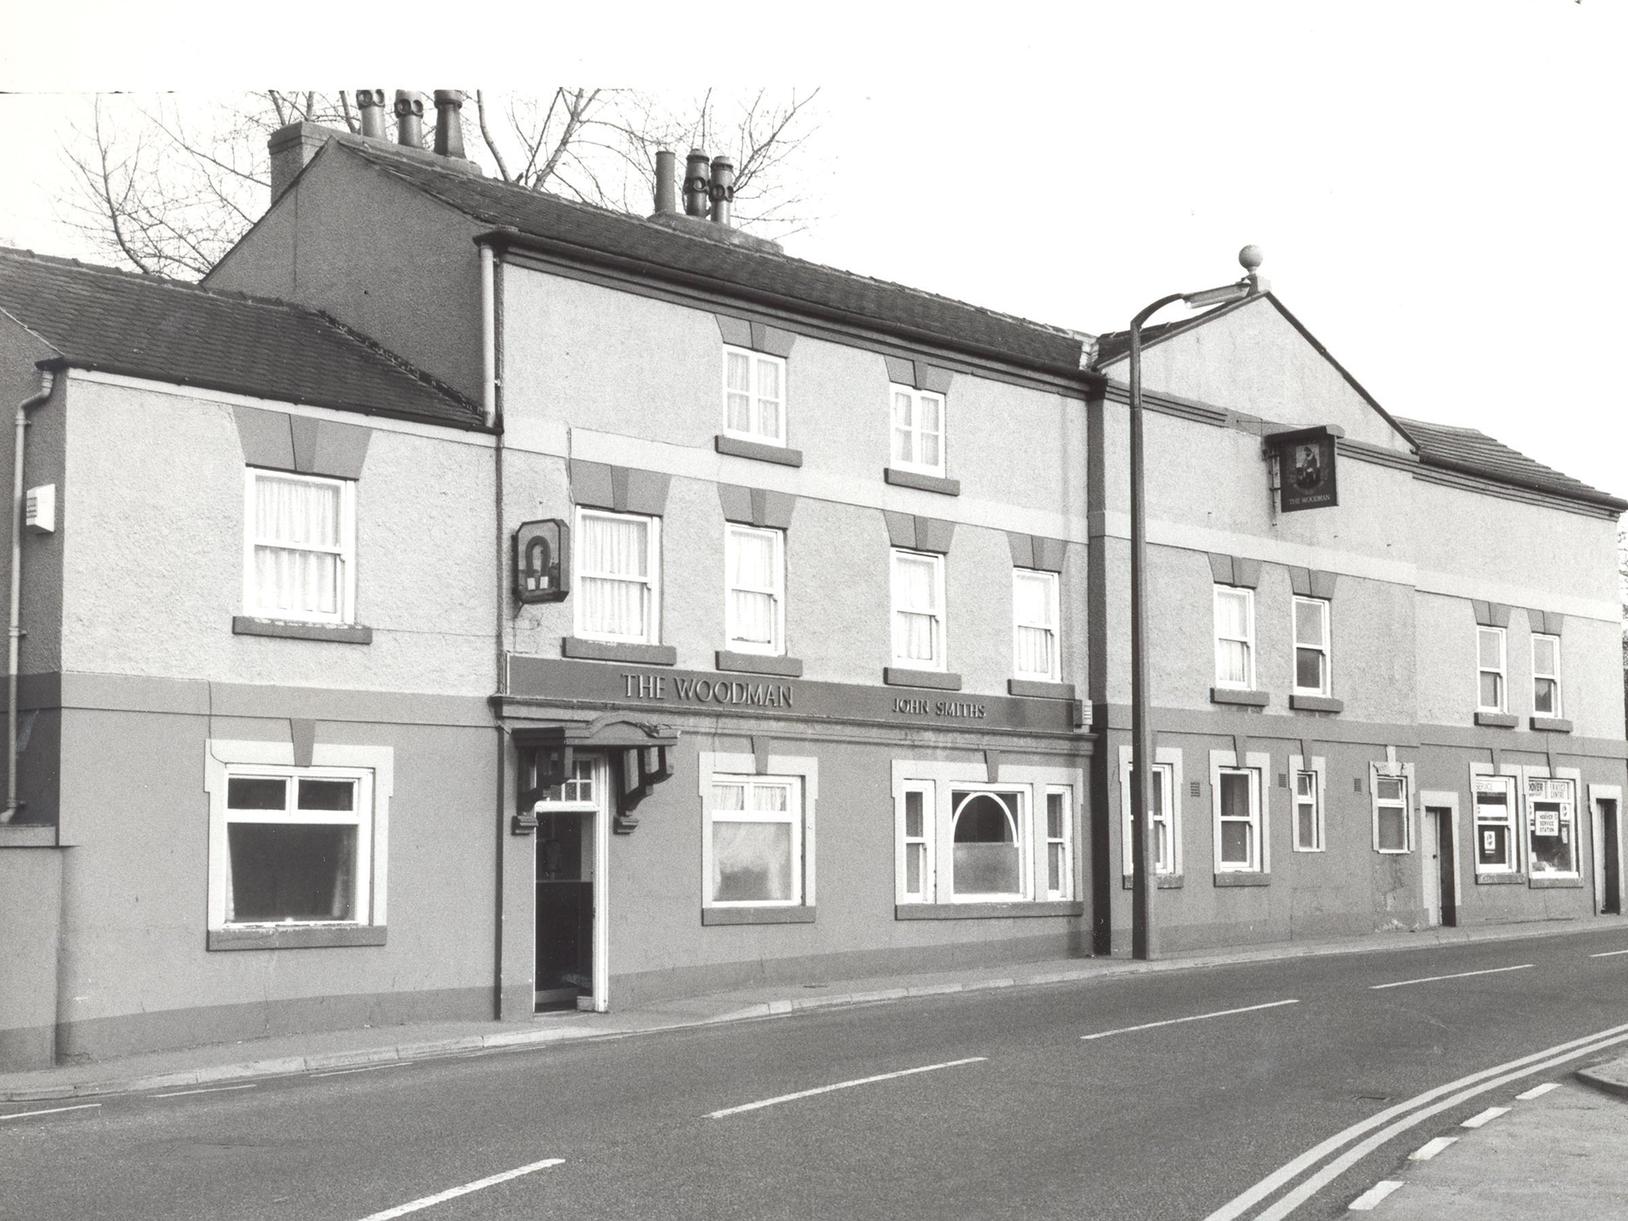 The Woodman pub on Selby Road. The licensee was Dioris Roberts at the time.